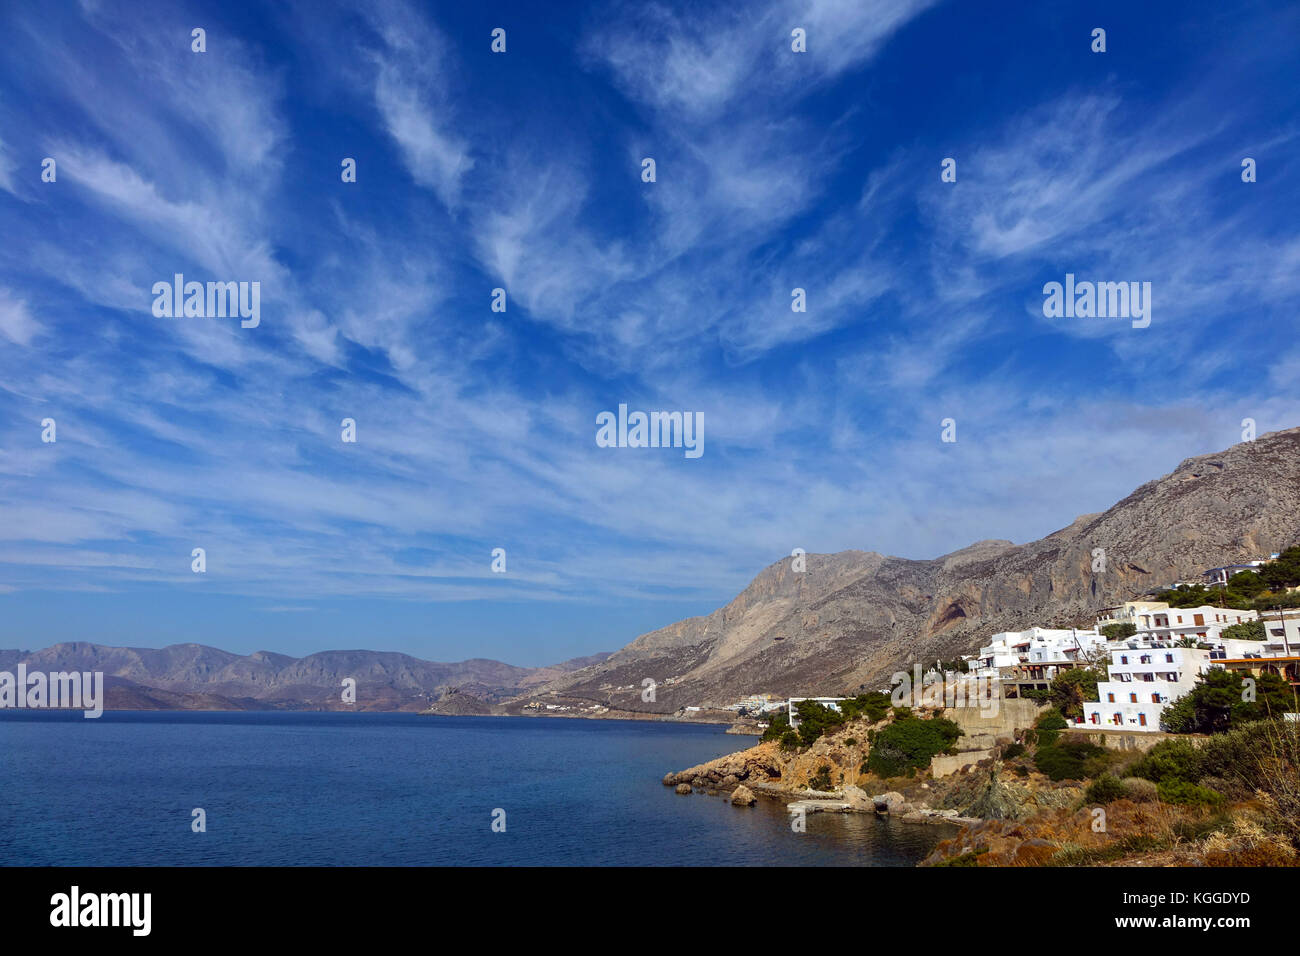 Blue sky with fair weather cirrus clouds, Kalymnos, Greece Stock Photo